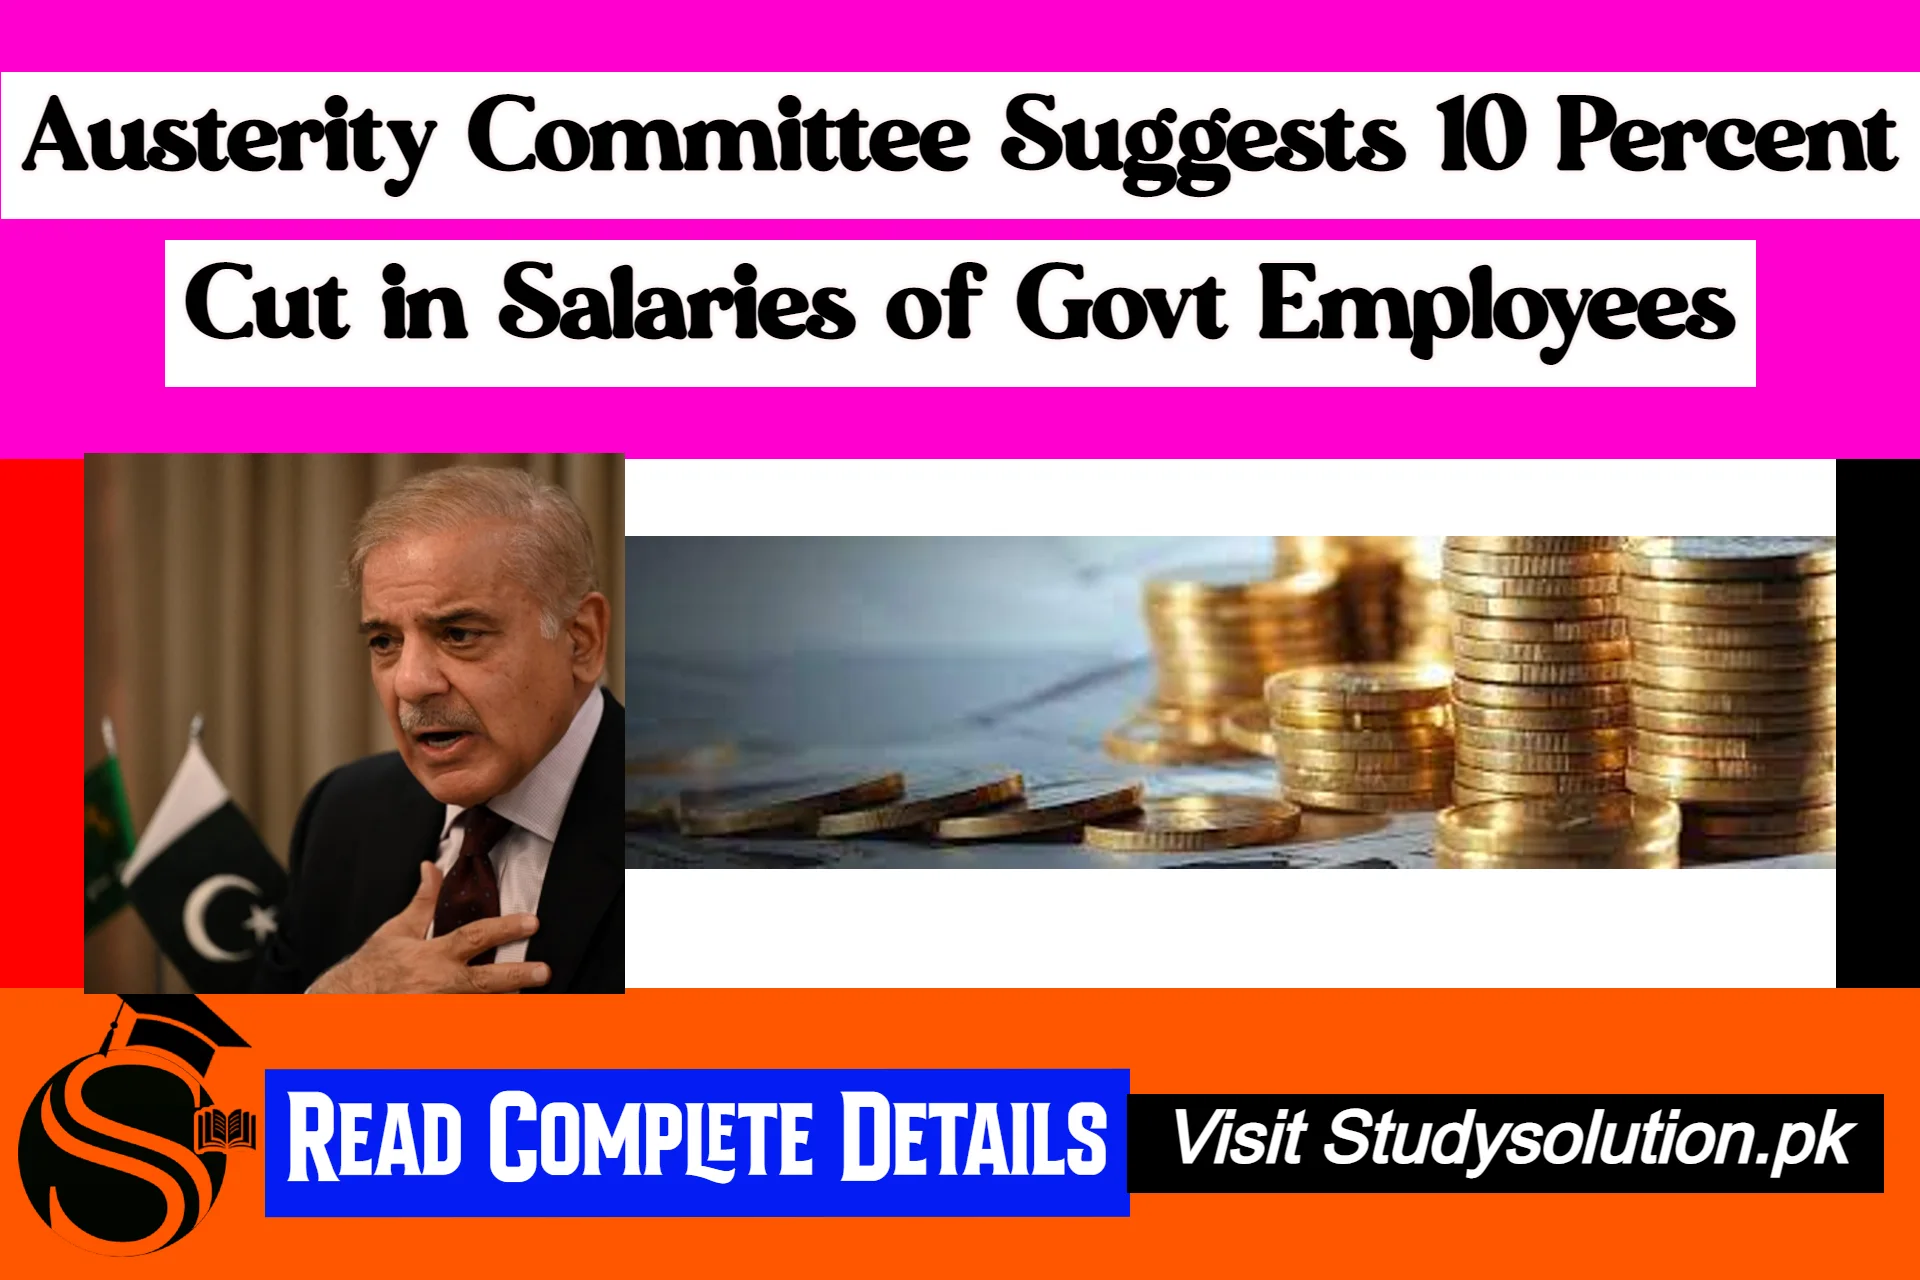 Austerity Committee Suggests 10 Percent Cut in Salaries